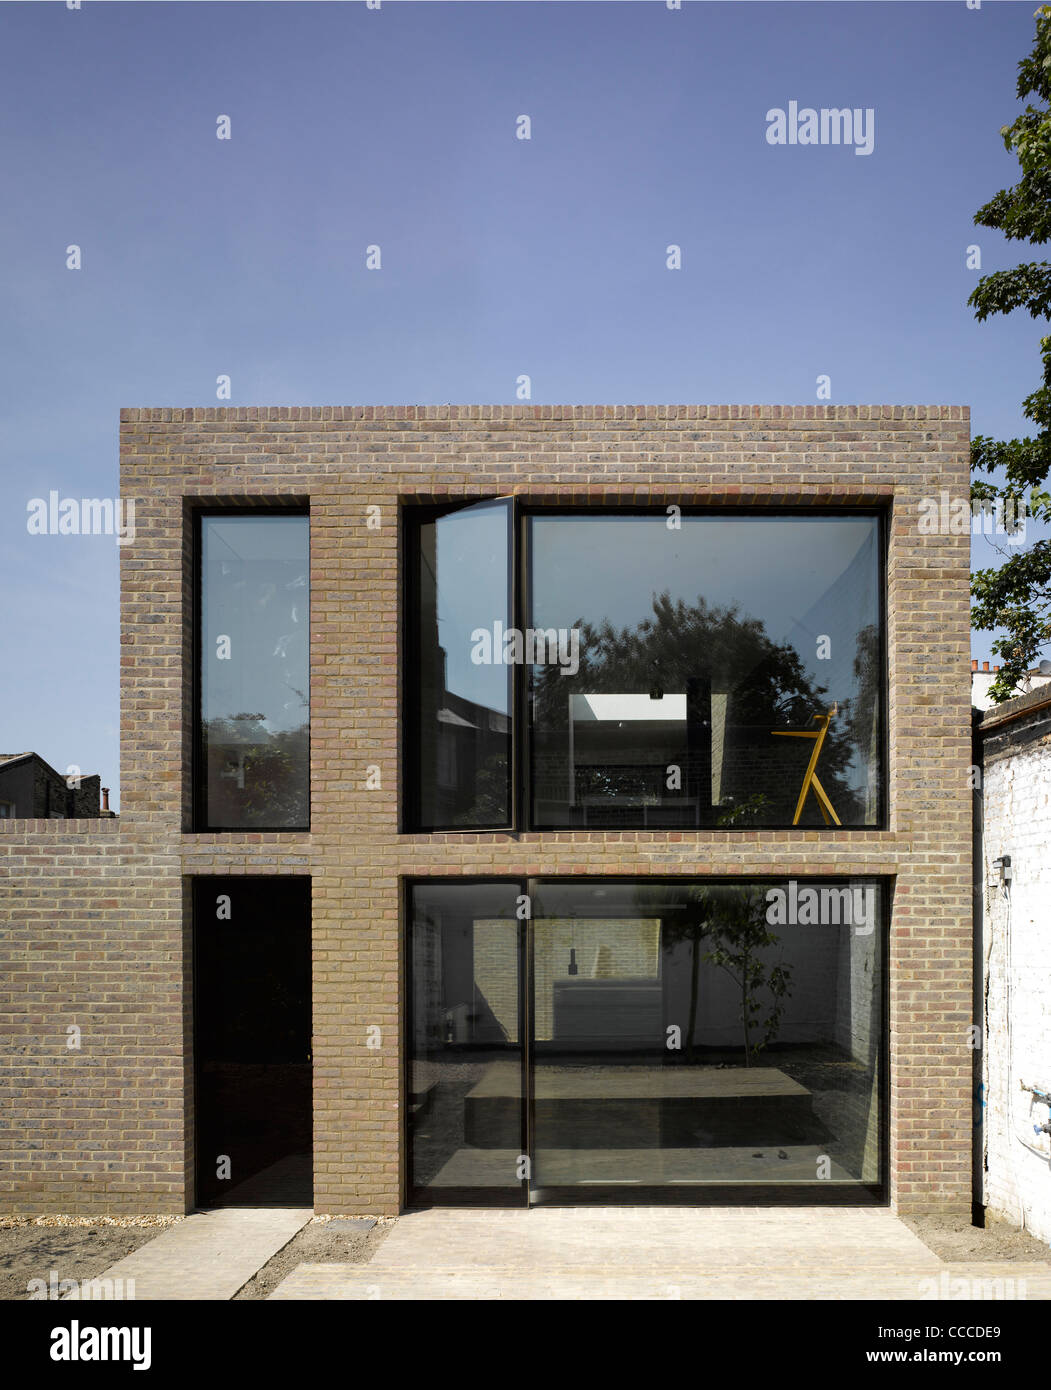 HOUSE ON KINGS GROVE-DUGGAN MORRIS ARCHITECTS-LONDON-EXTERIOR VIEW STRAIGHT ON Stock Photo